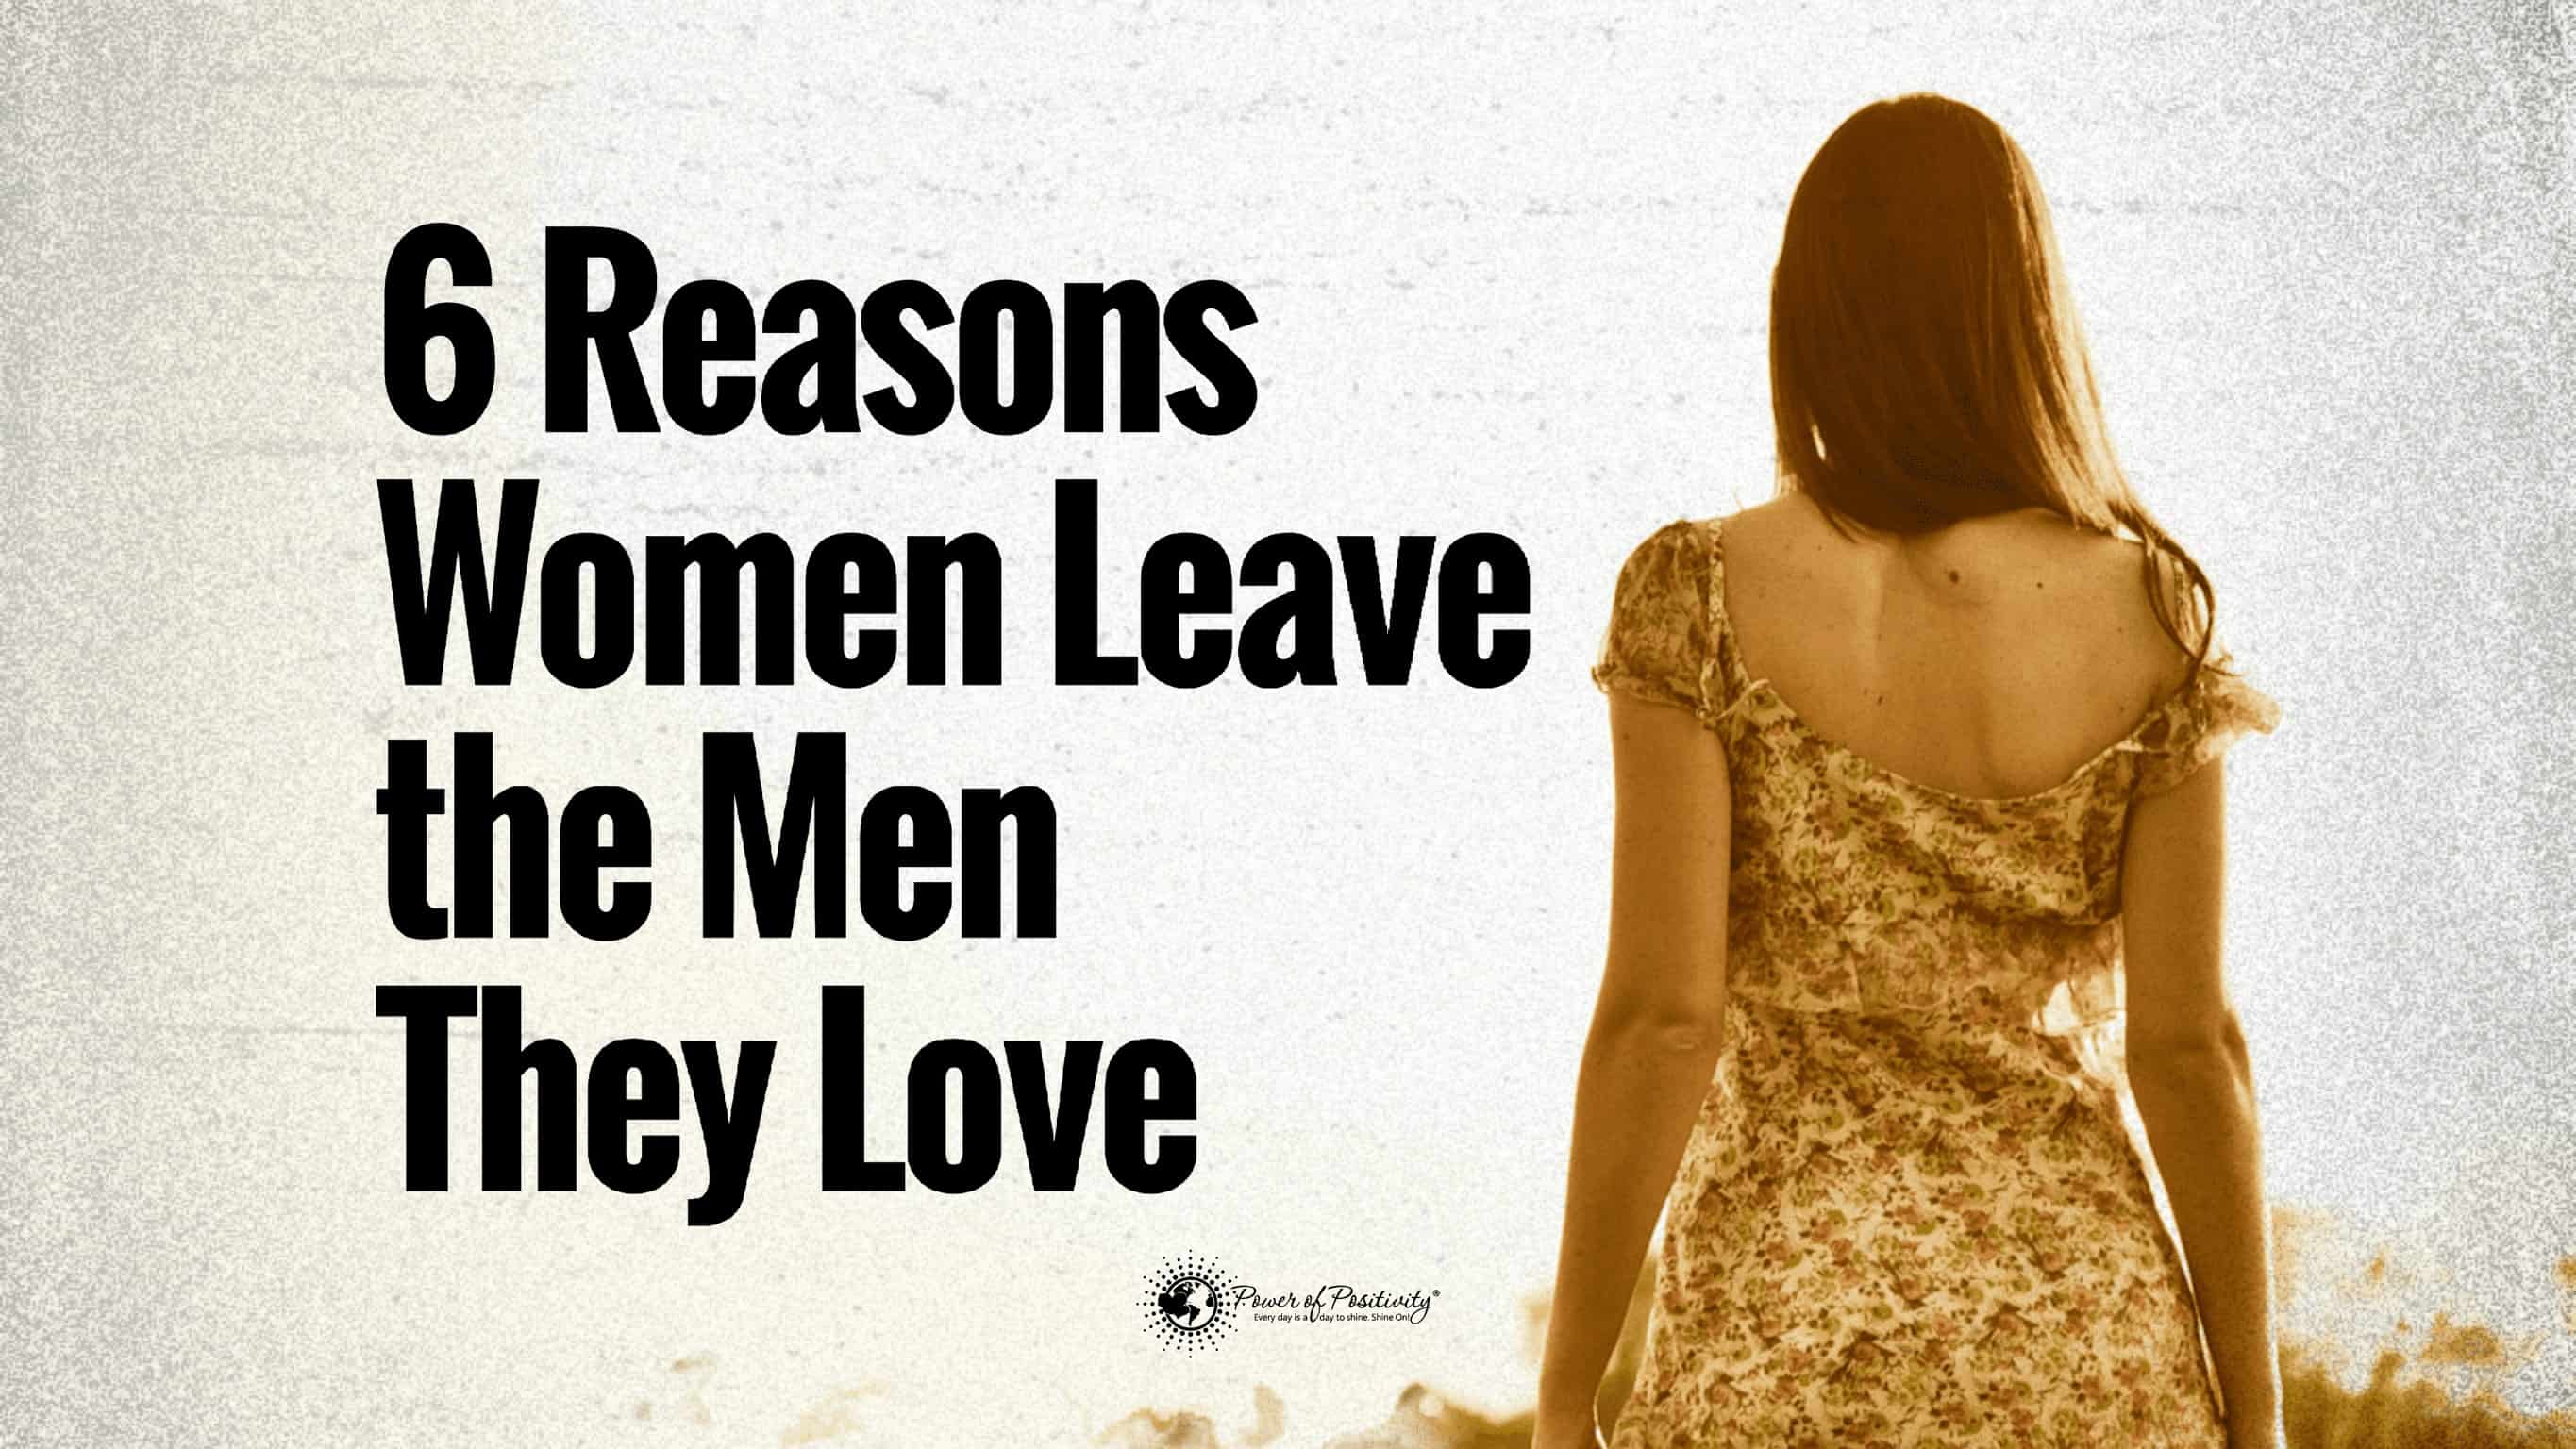 10 Reasons Women Leave The Men They Love Power Of Positivity